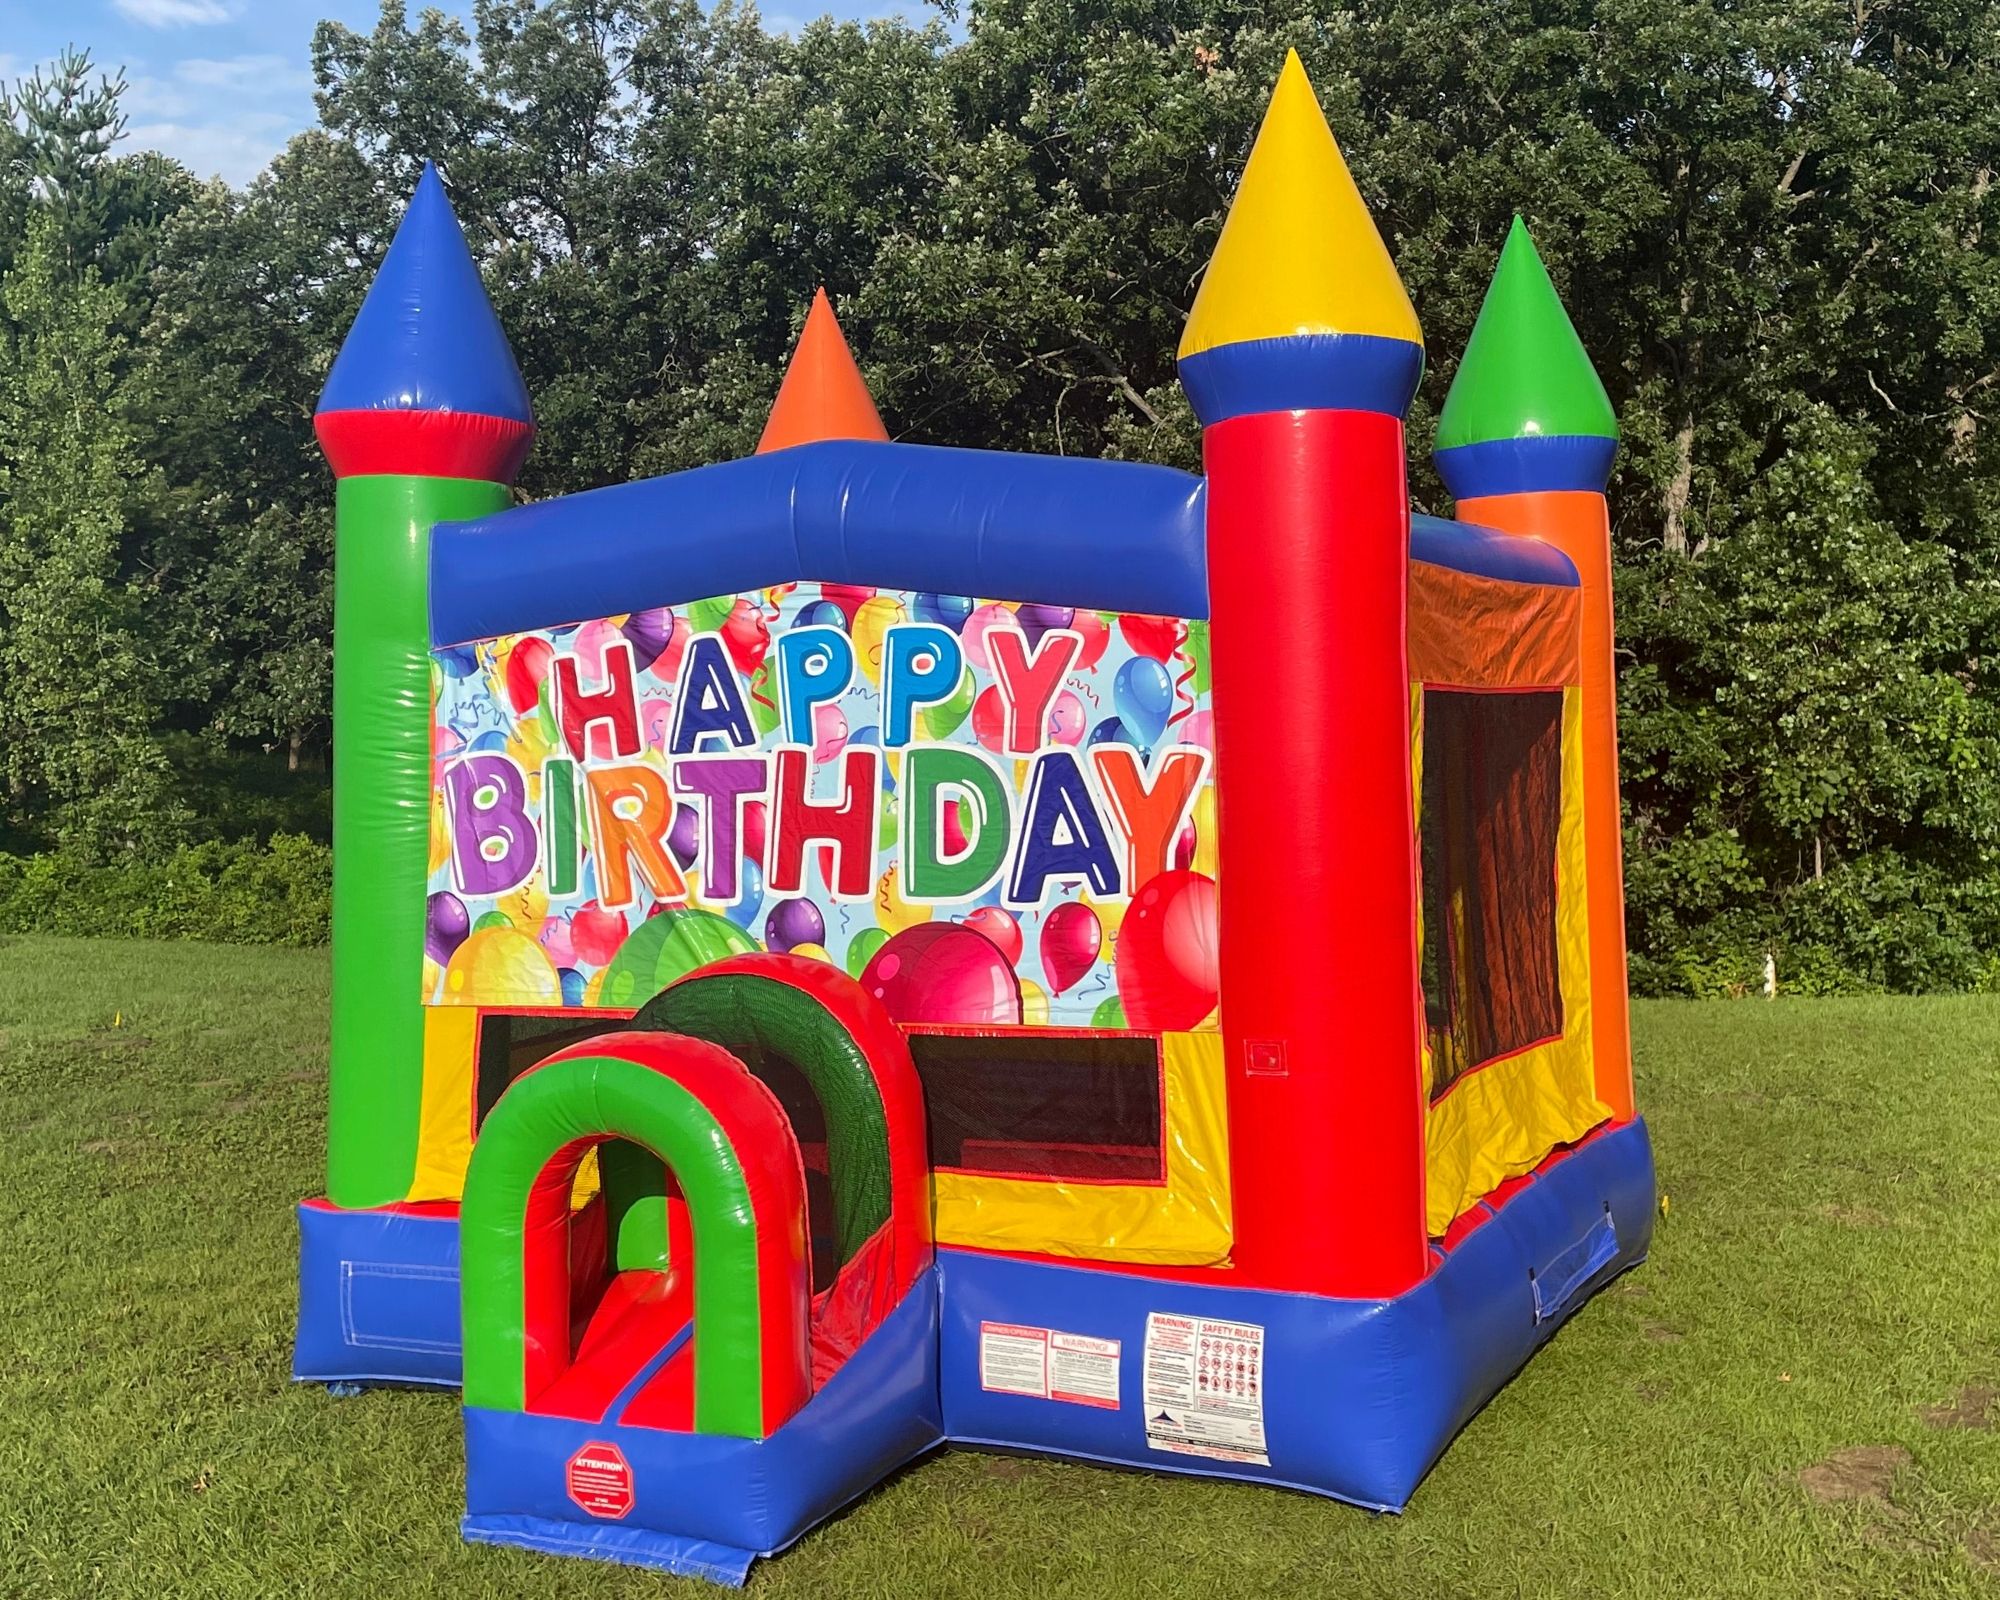 What Is The Best Inflatable Rentals Long Island Service In My Area? thumbnail